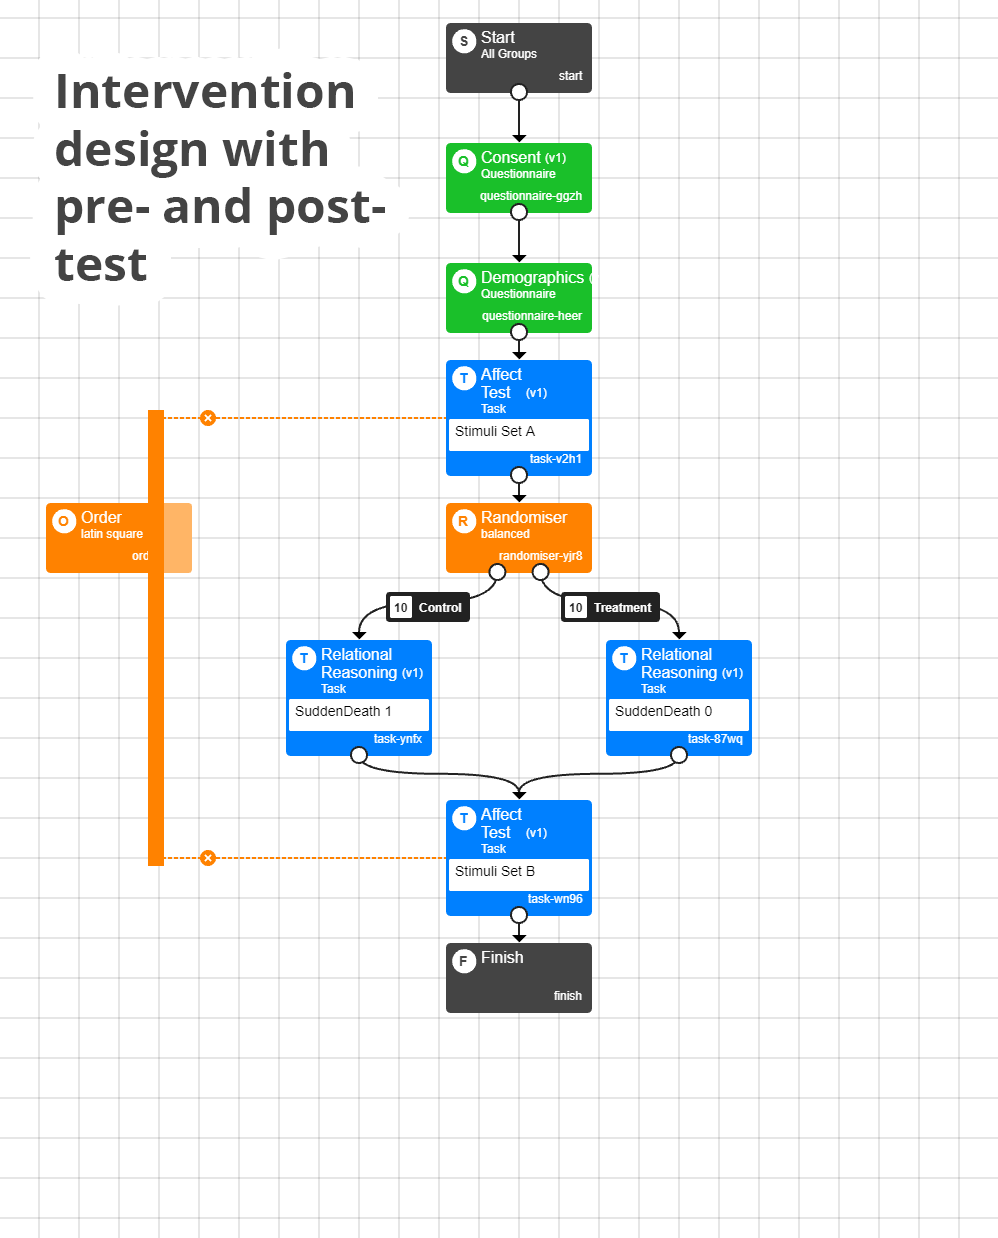 Screenshot of Experiment Builder showing an intervention design with a pre- and post- test